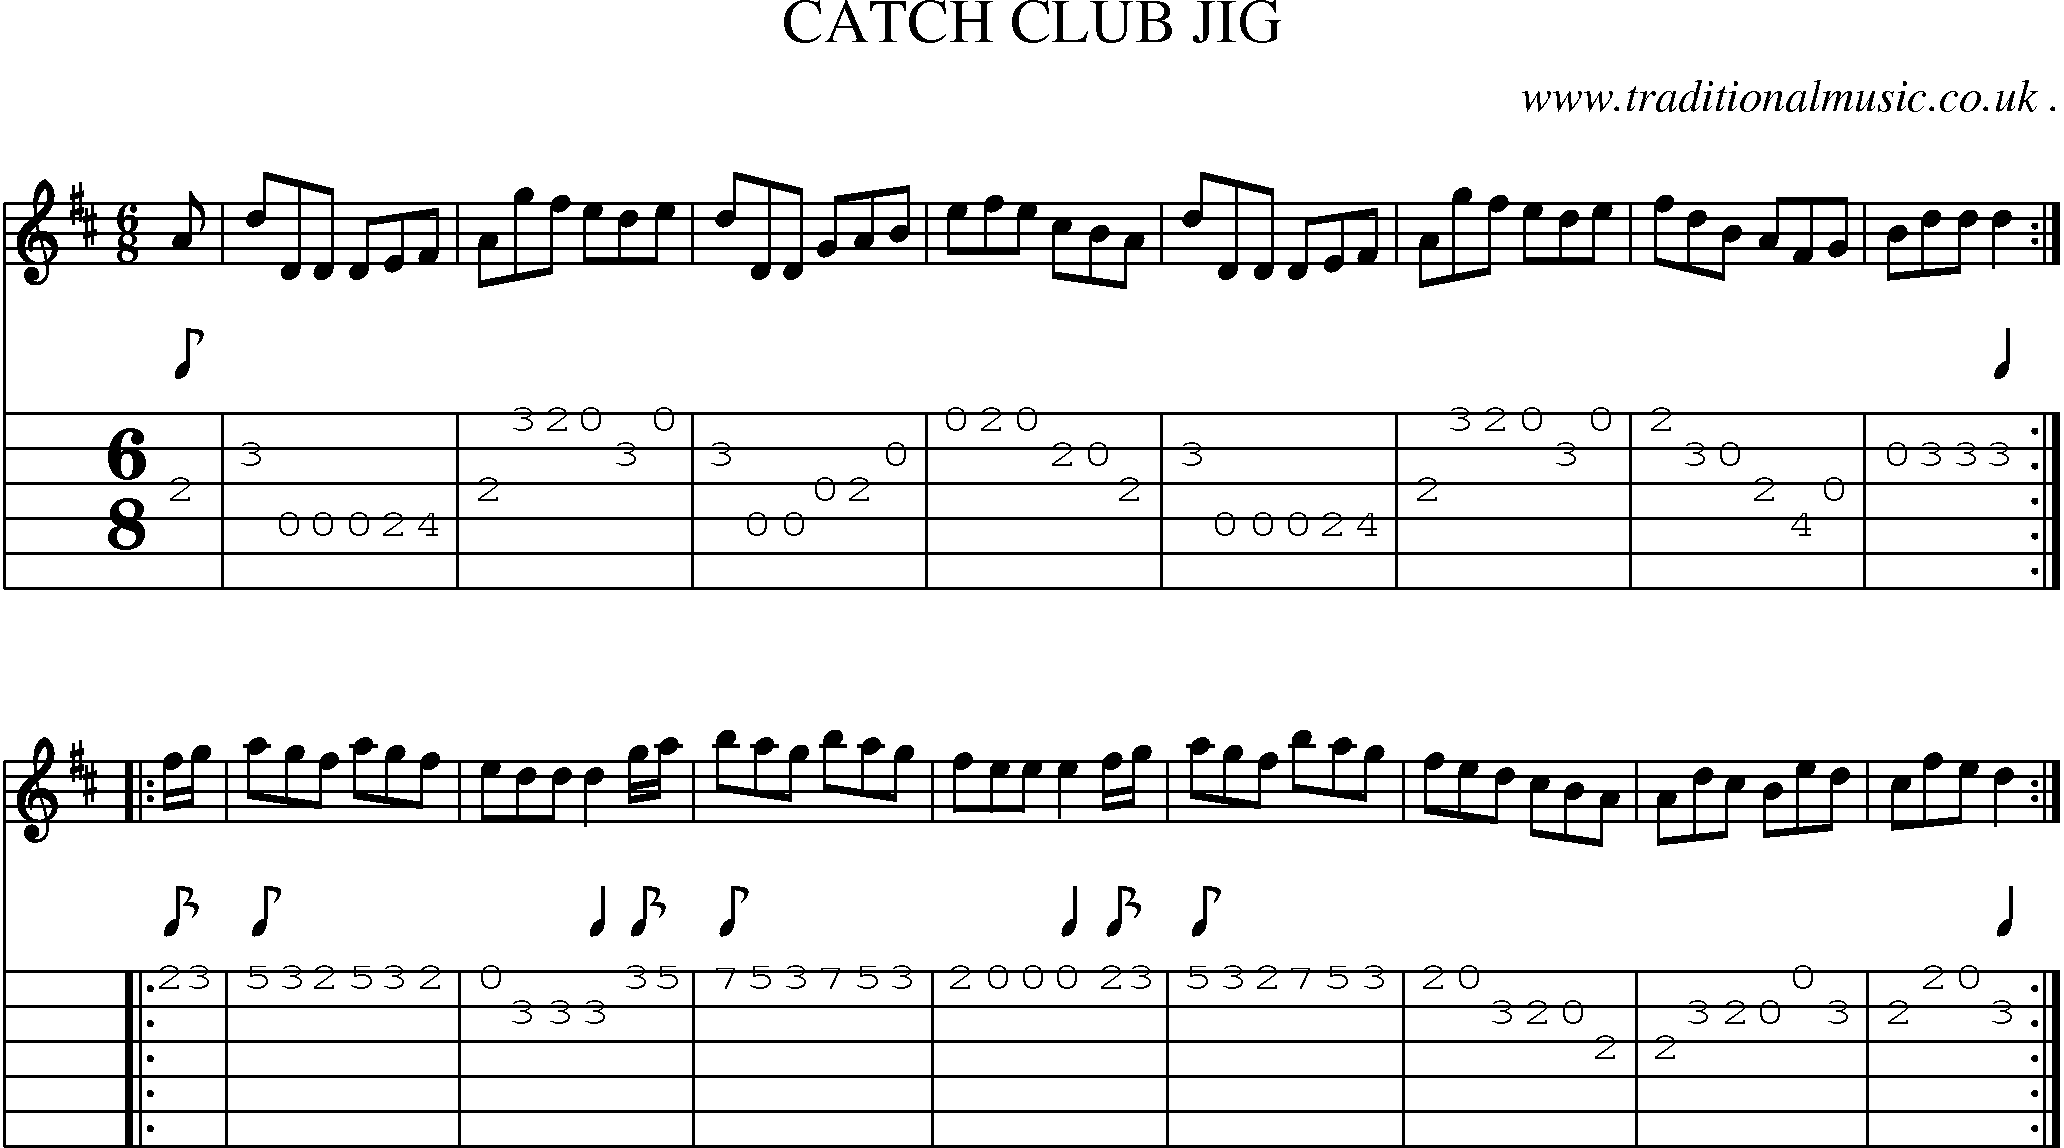 Sheet-Music and Guitar Tabs for Catch Club Jig